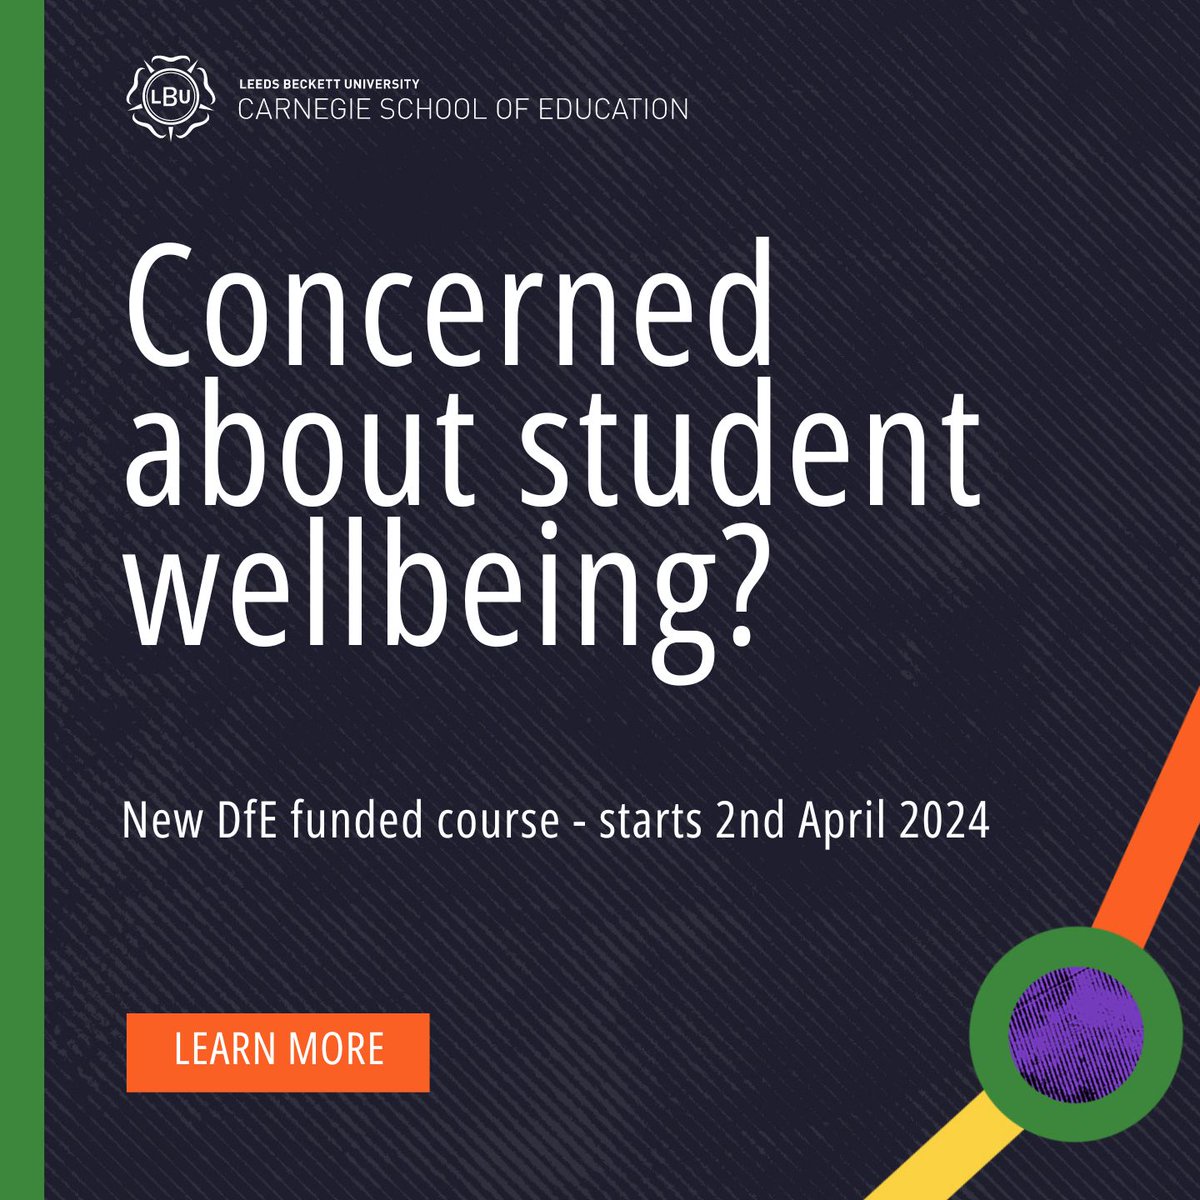 Get the support you need to to make a positive impact on student and staff well-being. Secure your spot on our fully-funded Senior Mental Health Lead train starting April 2nd! 🎓 ow.ly/igEz50QKJzB